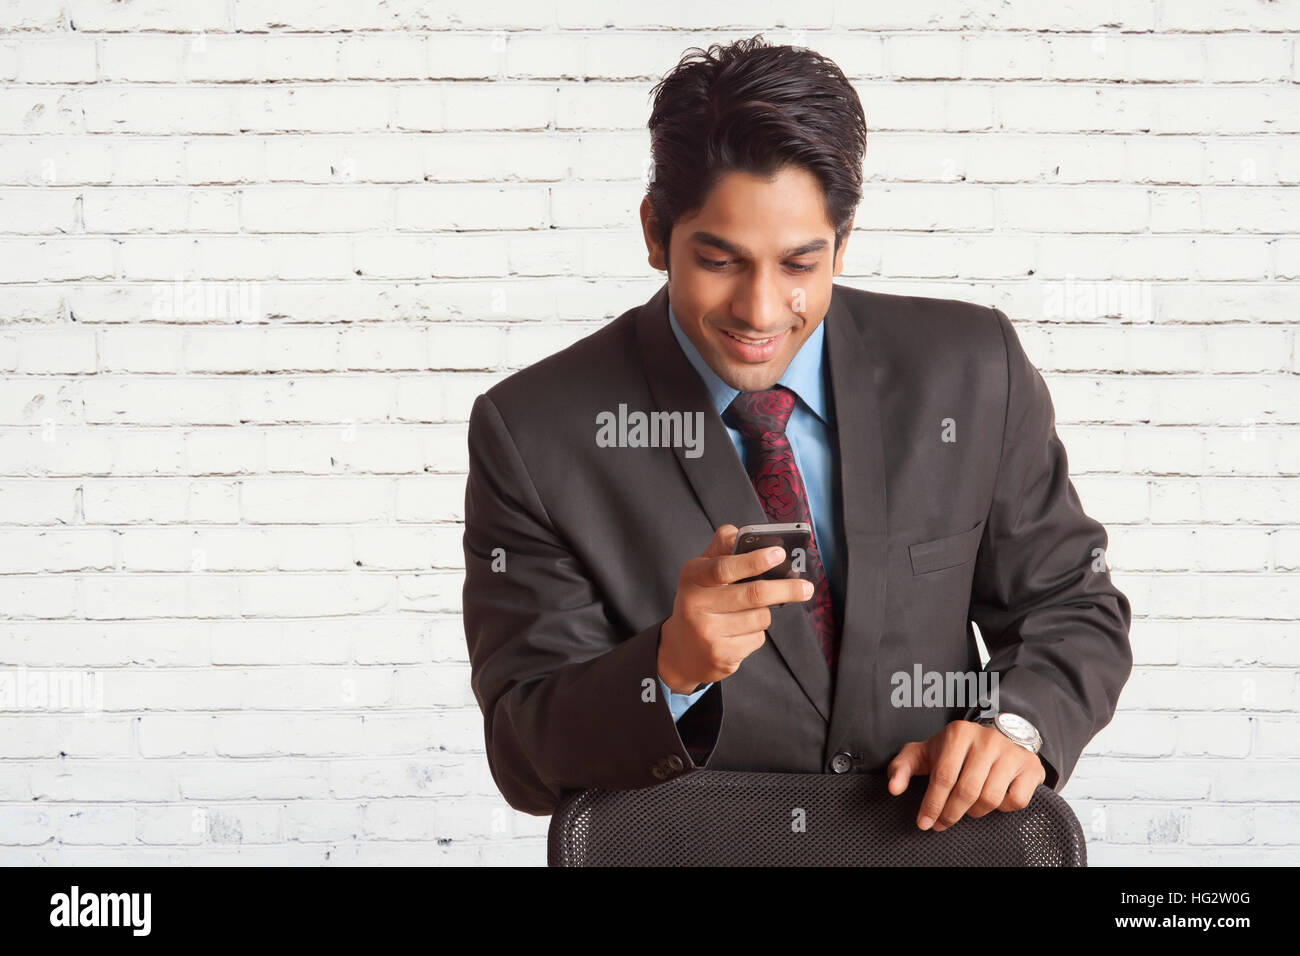 Executive using cell phone Stock Photo